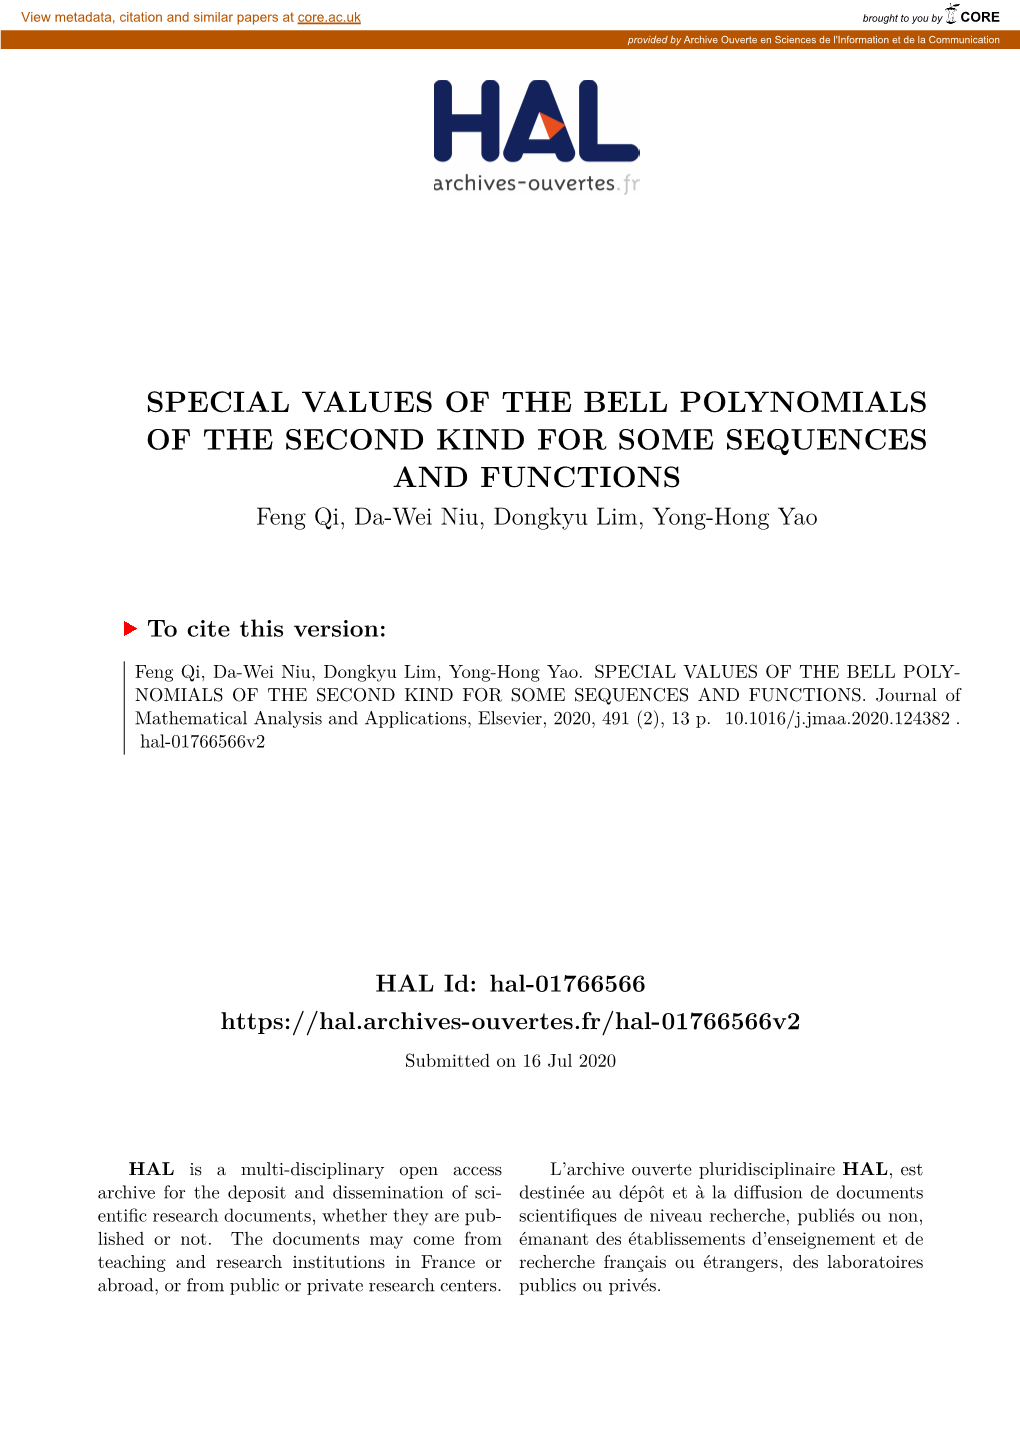 SPECIAL VALUES of the BELL POLYNOMIALS of the SECOND KIND for SOME SEQUENCES and FUNCTIONS Feng Qi, Da-Wei Niu, Dongkyu Lim, Yong-Hong Yao